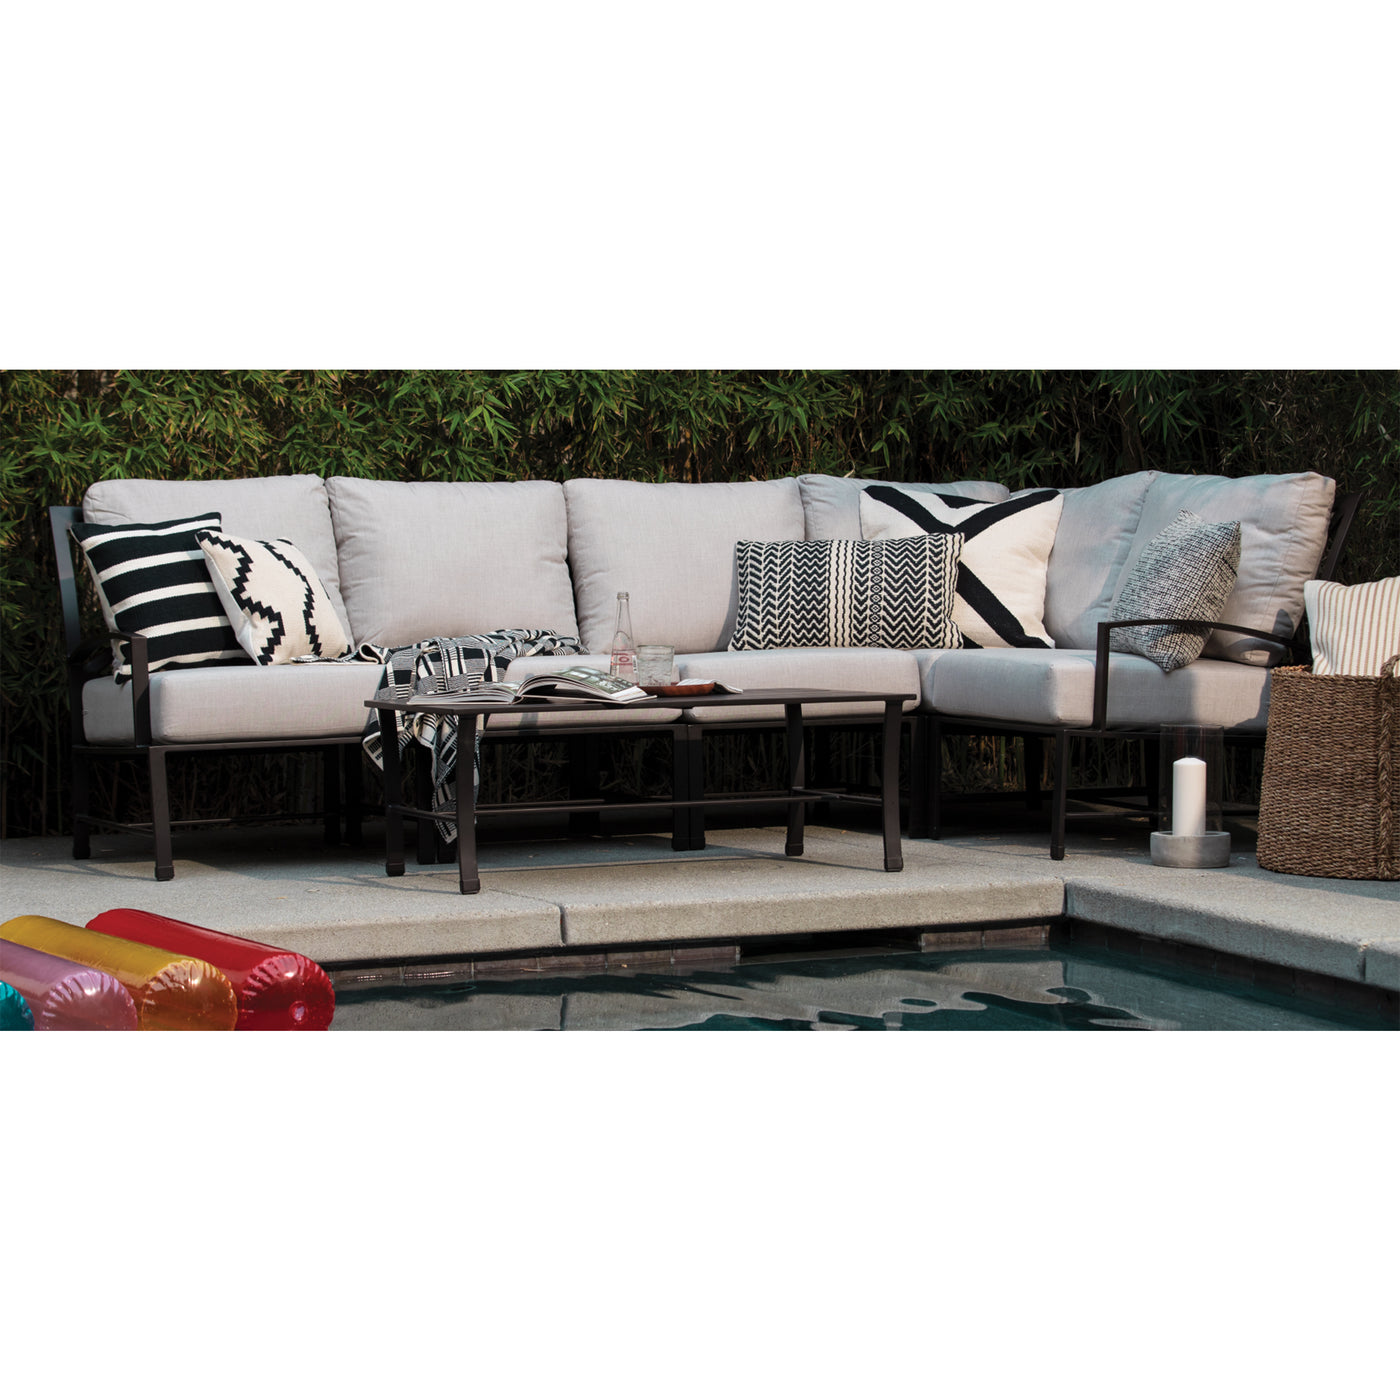  Yardbird Colby Outdoor Small Sectional Set Outdoor Furniture